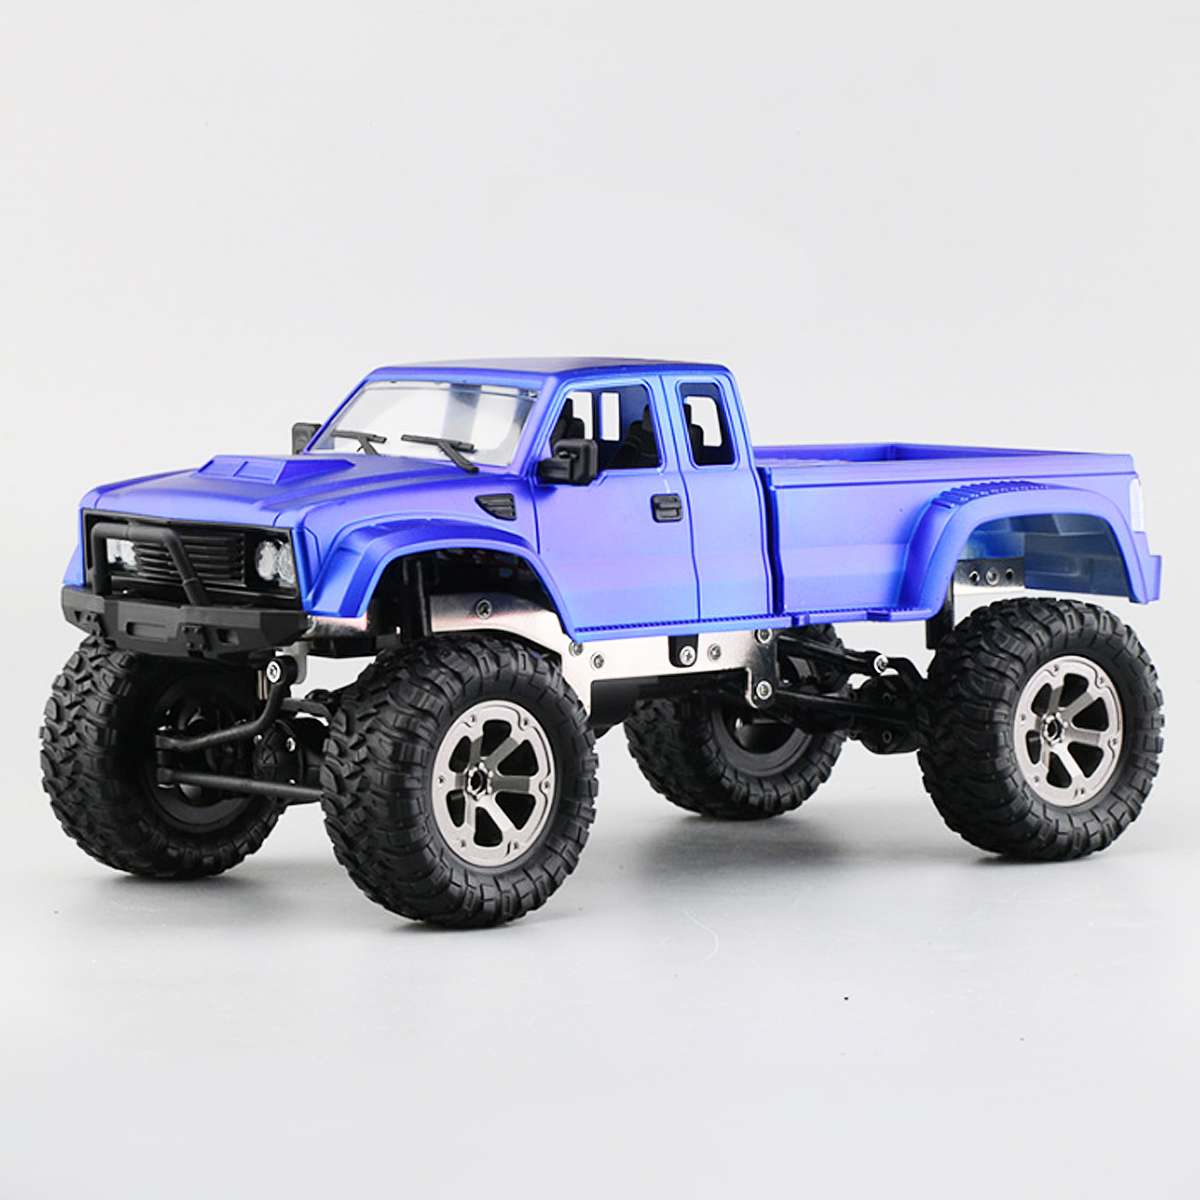 2.4GHz 1:18 Remote Control Race RC Truck Electric Monster Truck 4WD Four Wheels Off-Road Vehicle Red/Blue